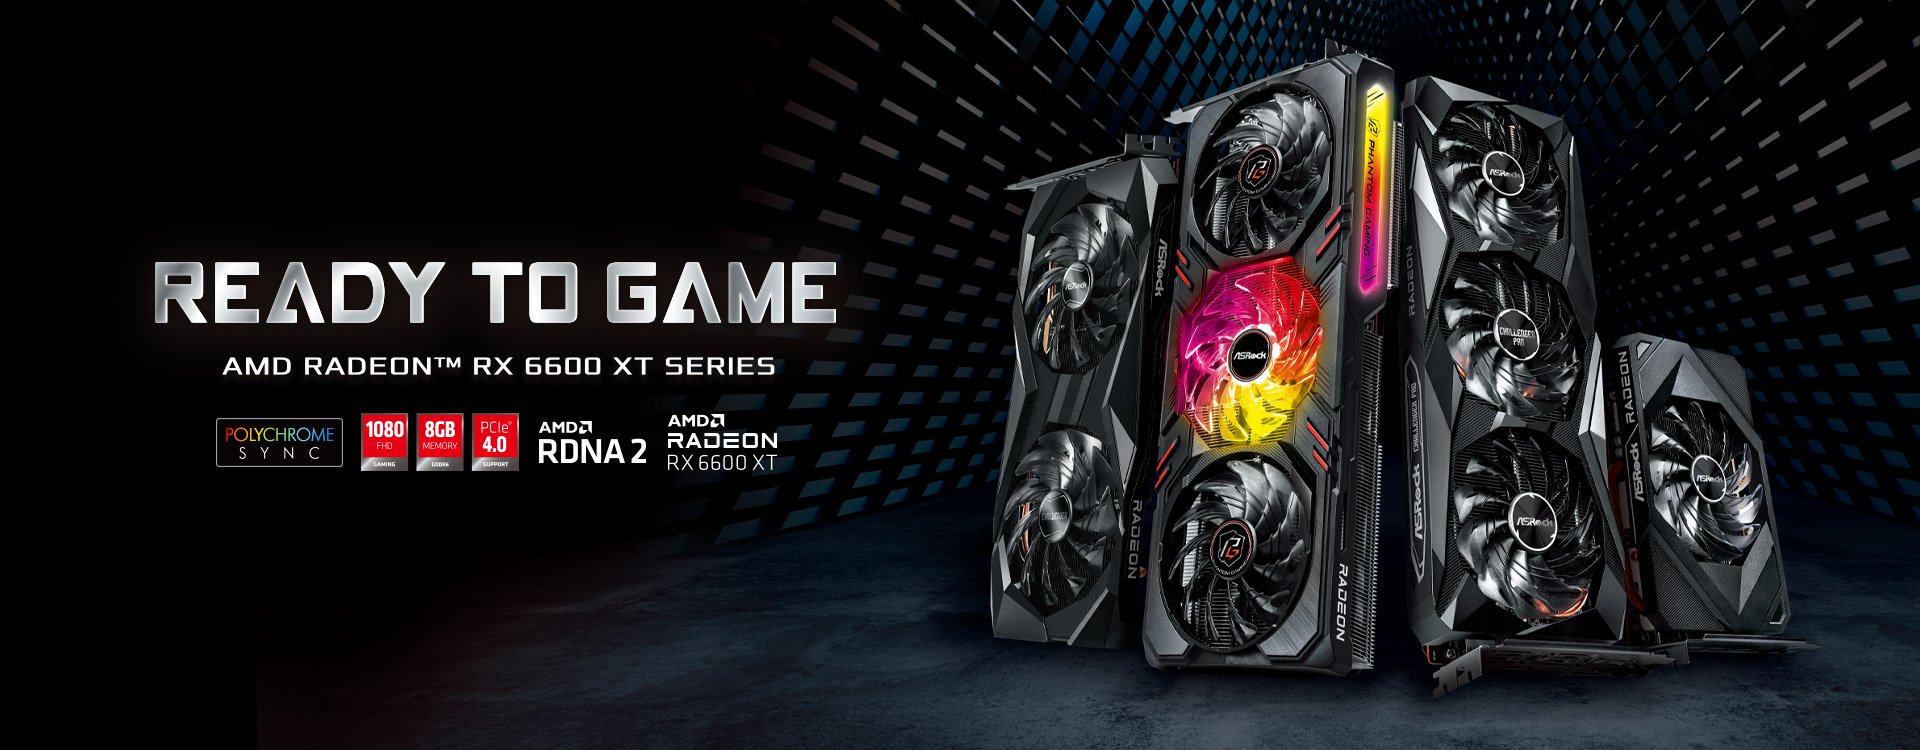 ASRock Announces AMD Radeon™ RX 6600 XT Series Graphics Cards Providing the Ultimate 1080p Gaming Performance-1